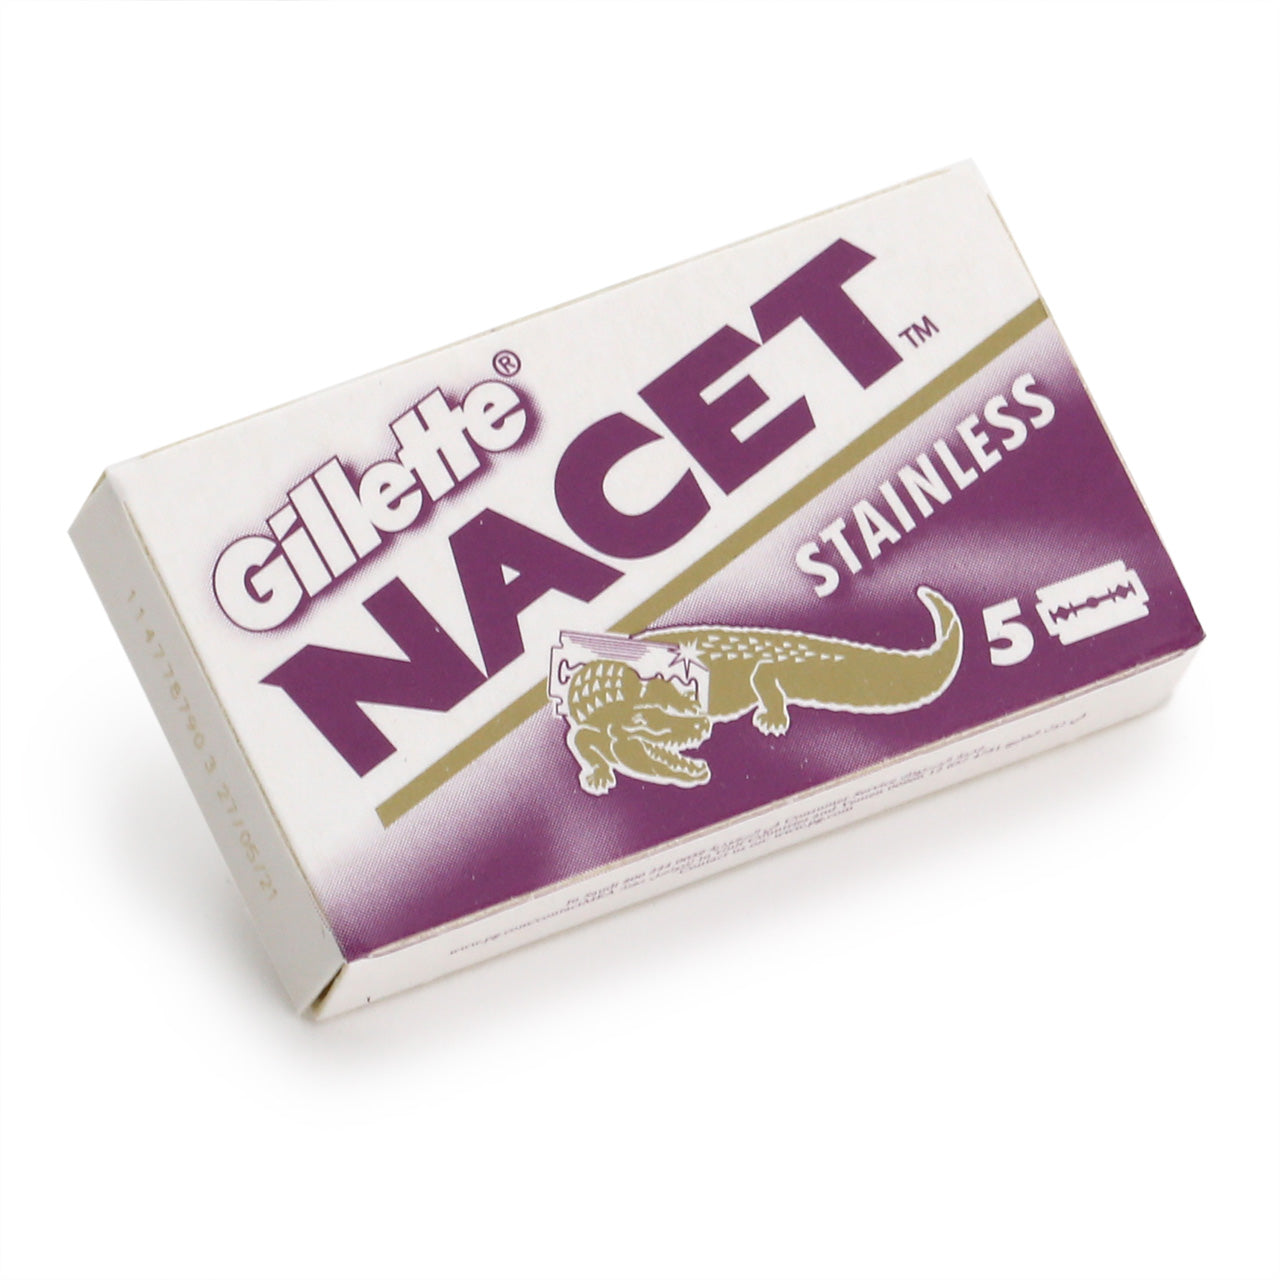 a pack  of 5 DE blades from Gillet Nacet - Stainless